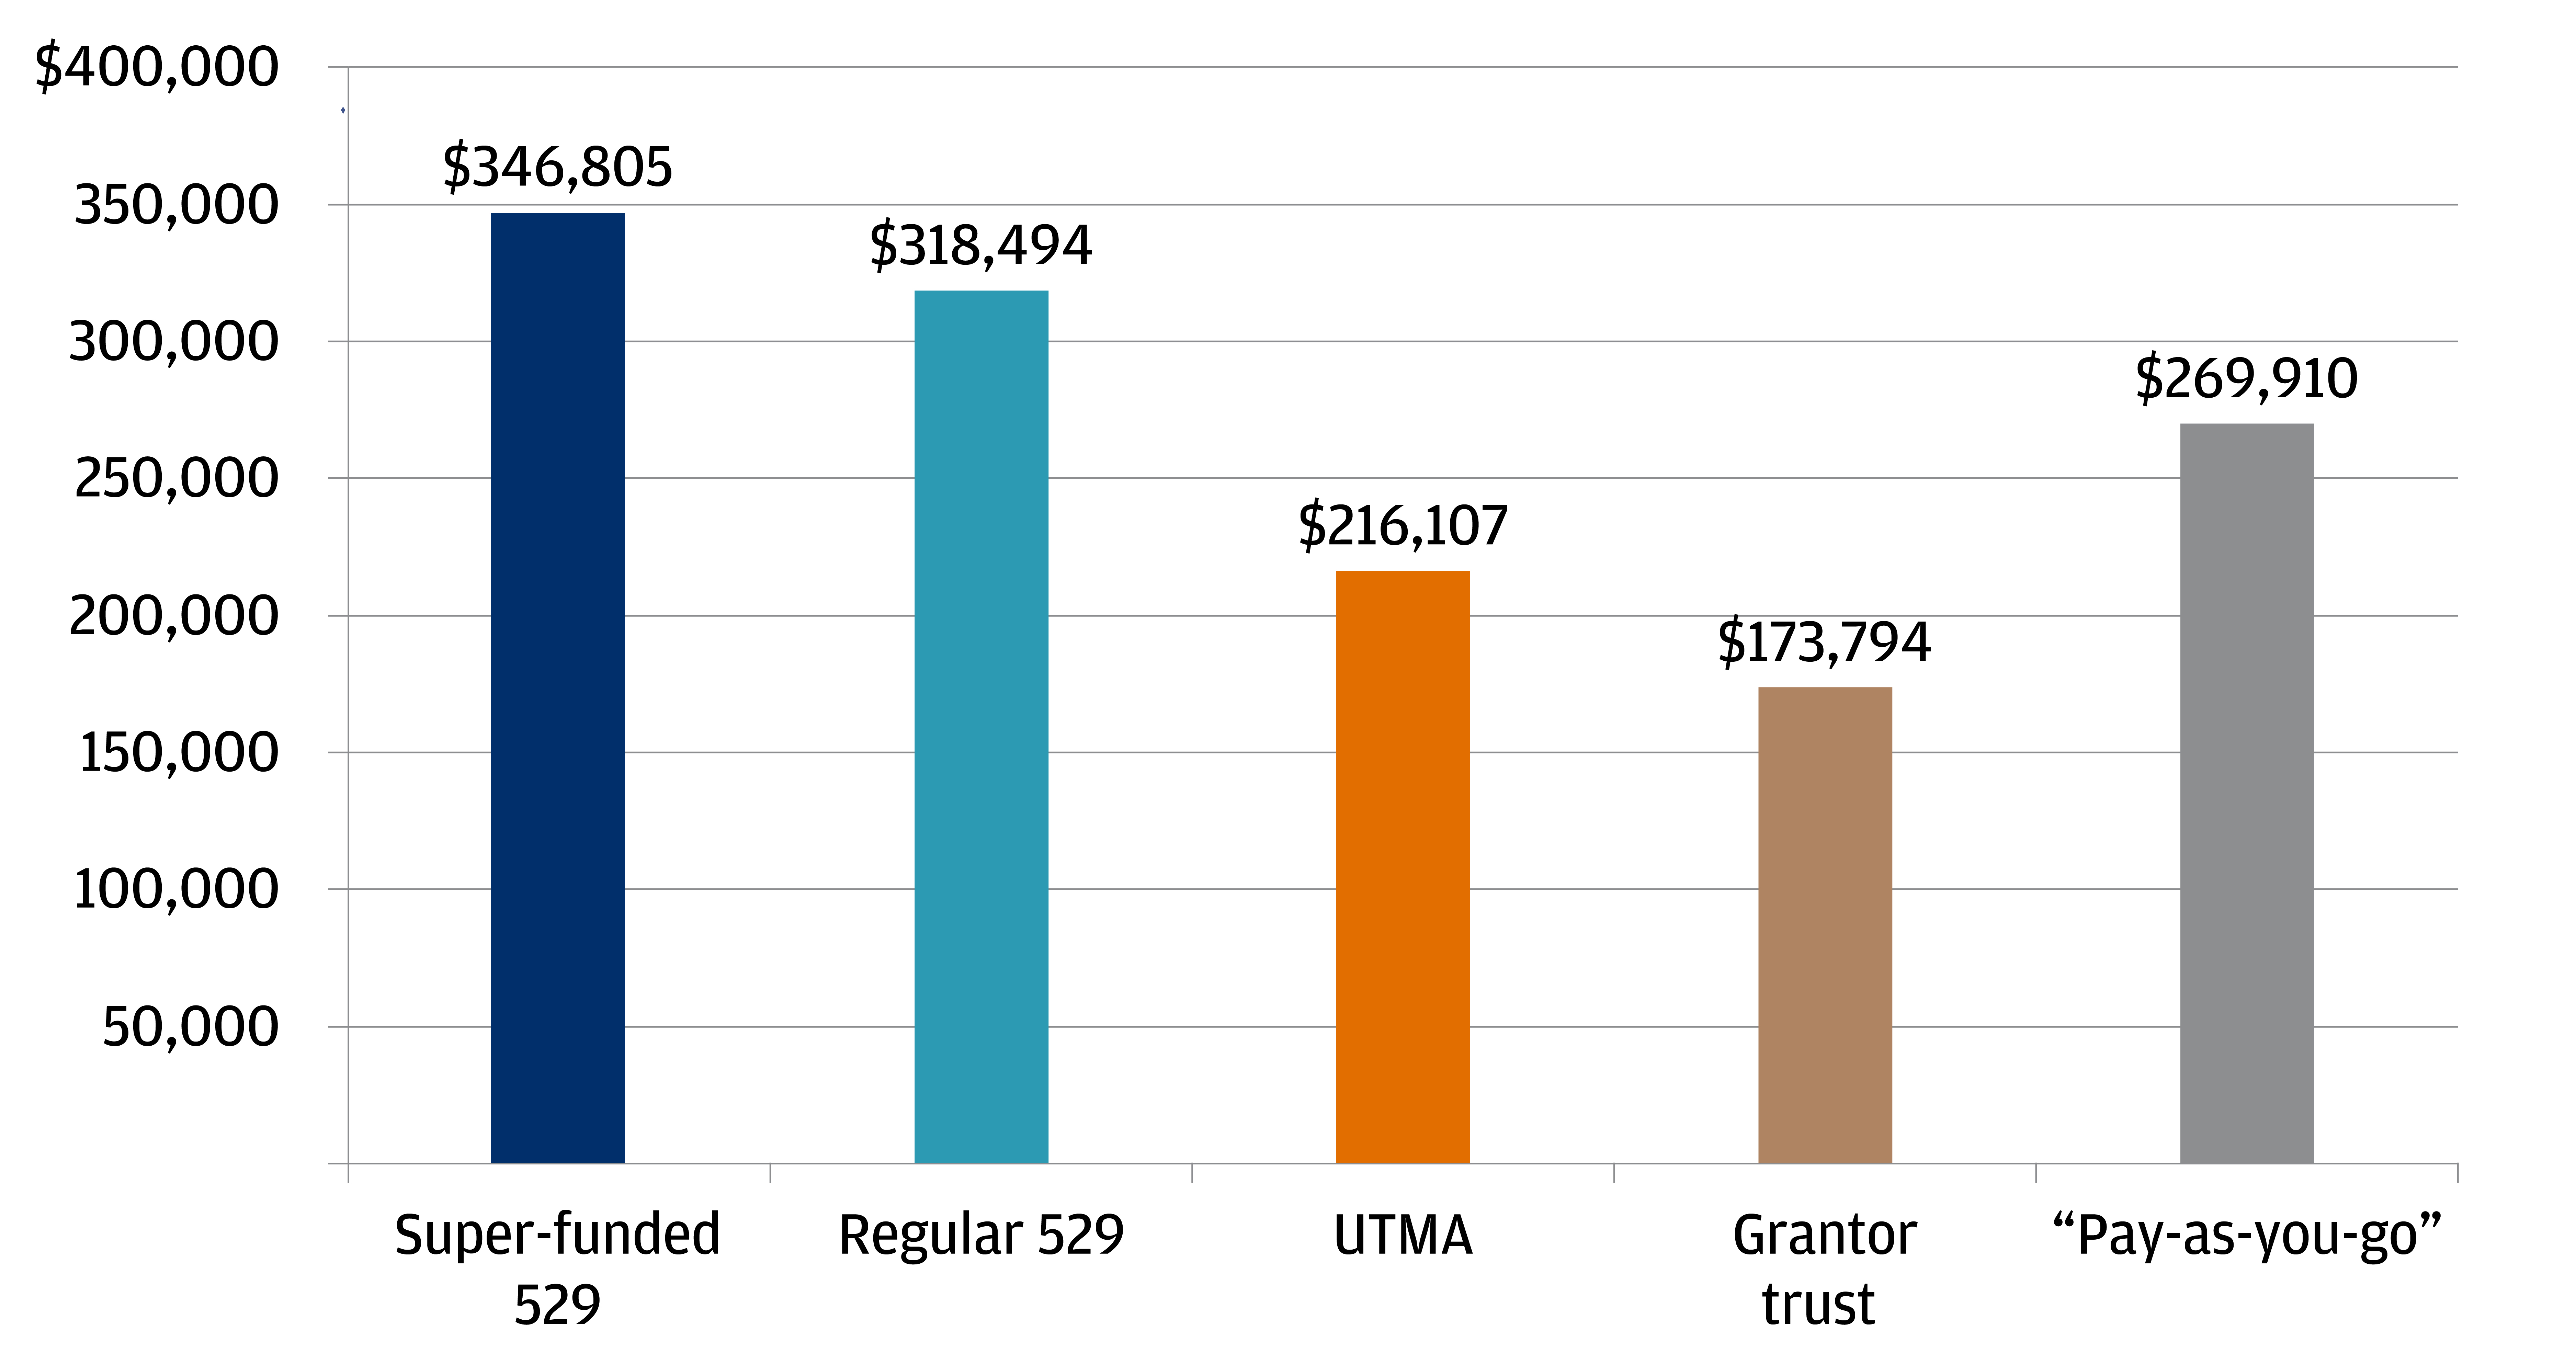 This bar graph shows the growth since Tom invested in 1997 if he chose the following options: Super-funded 529, Regular 529, UTMA, Grantor Trust, and Pay-as-you-go. After 24 years, the balance in the super-funded 529 account is almost $347,000-more than any other type of account